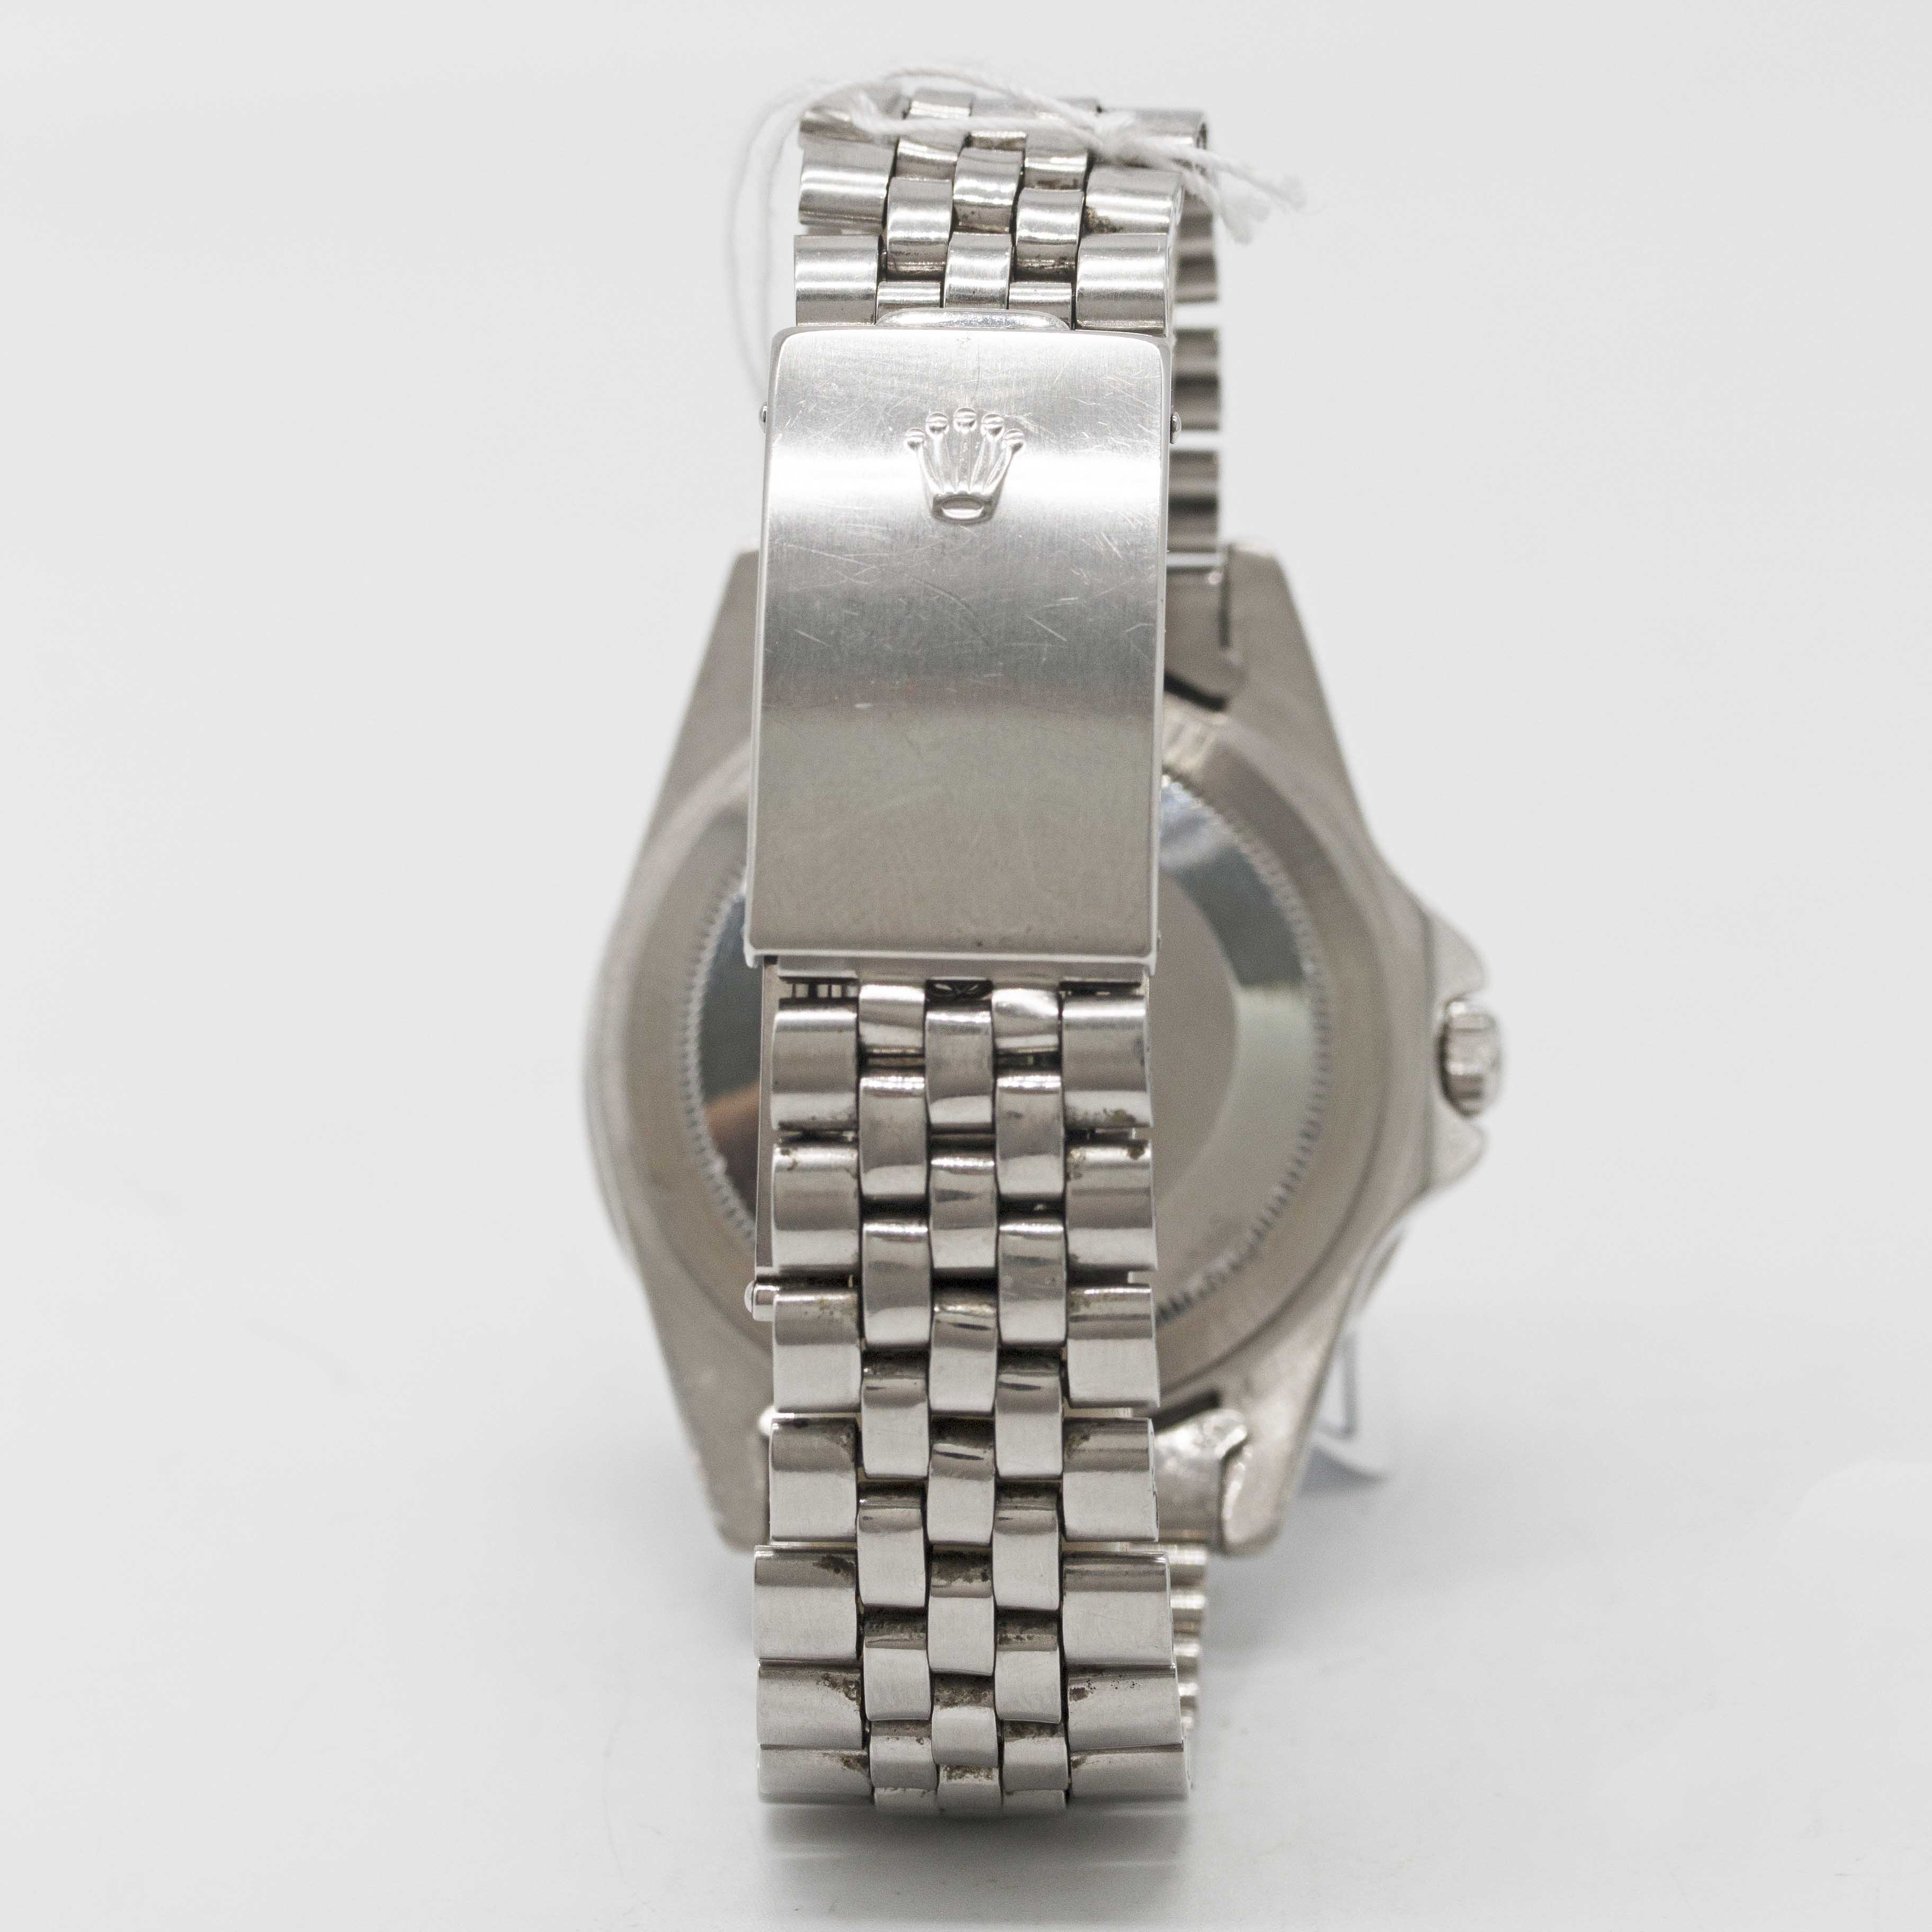 A RARE GENTLEMAN'S STAINLESS STEEL ROLEX OYSTER PERPETUAL GMT MASTER BRACELET WATCH CIRCA 1961, REF. - Image 7 of 11